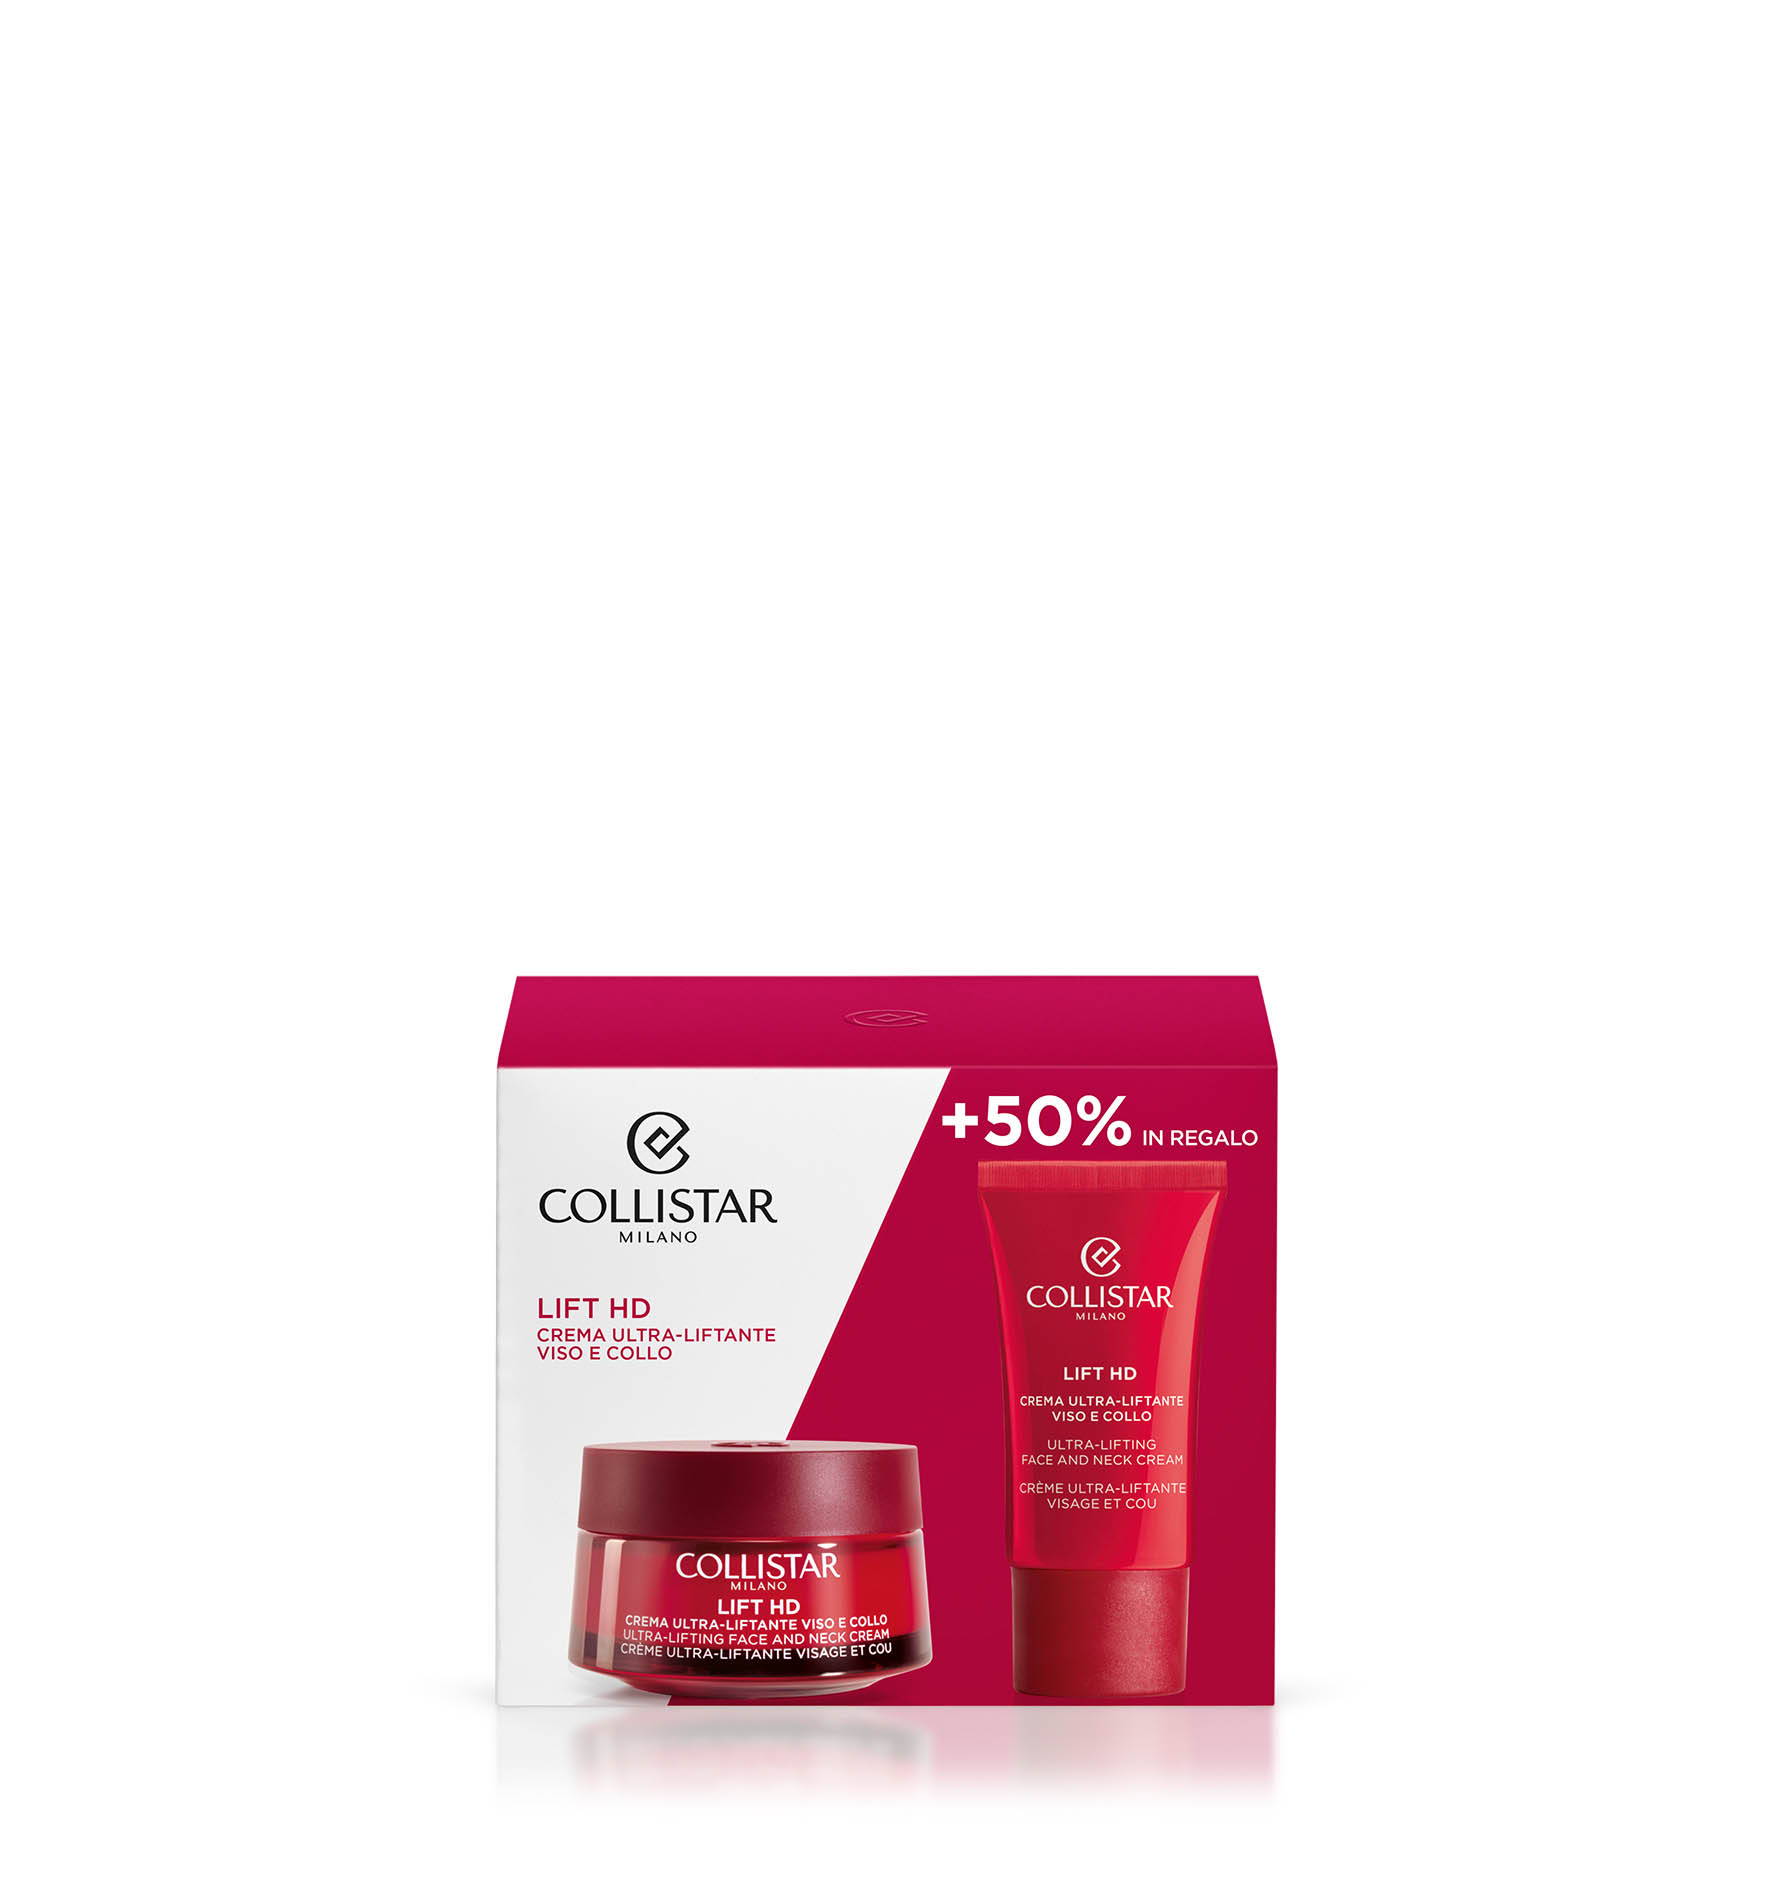 LIFT HD ULTRA-LIFTING FACE AND NECK CREAM 50 ml SET - NEW | Collistar - Shop Online Ufficiale